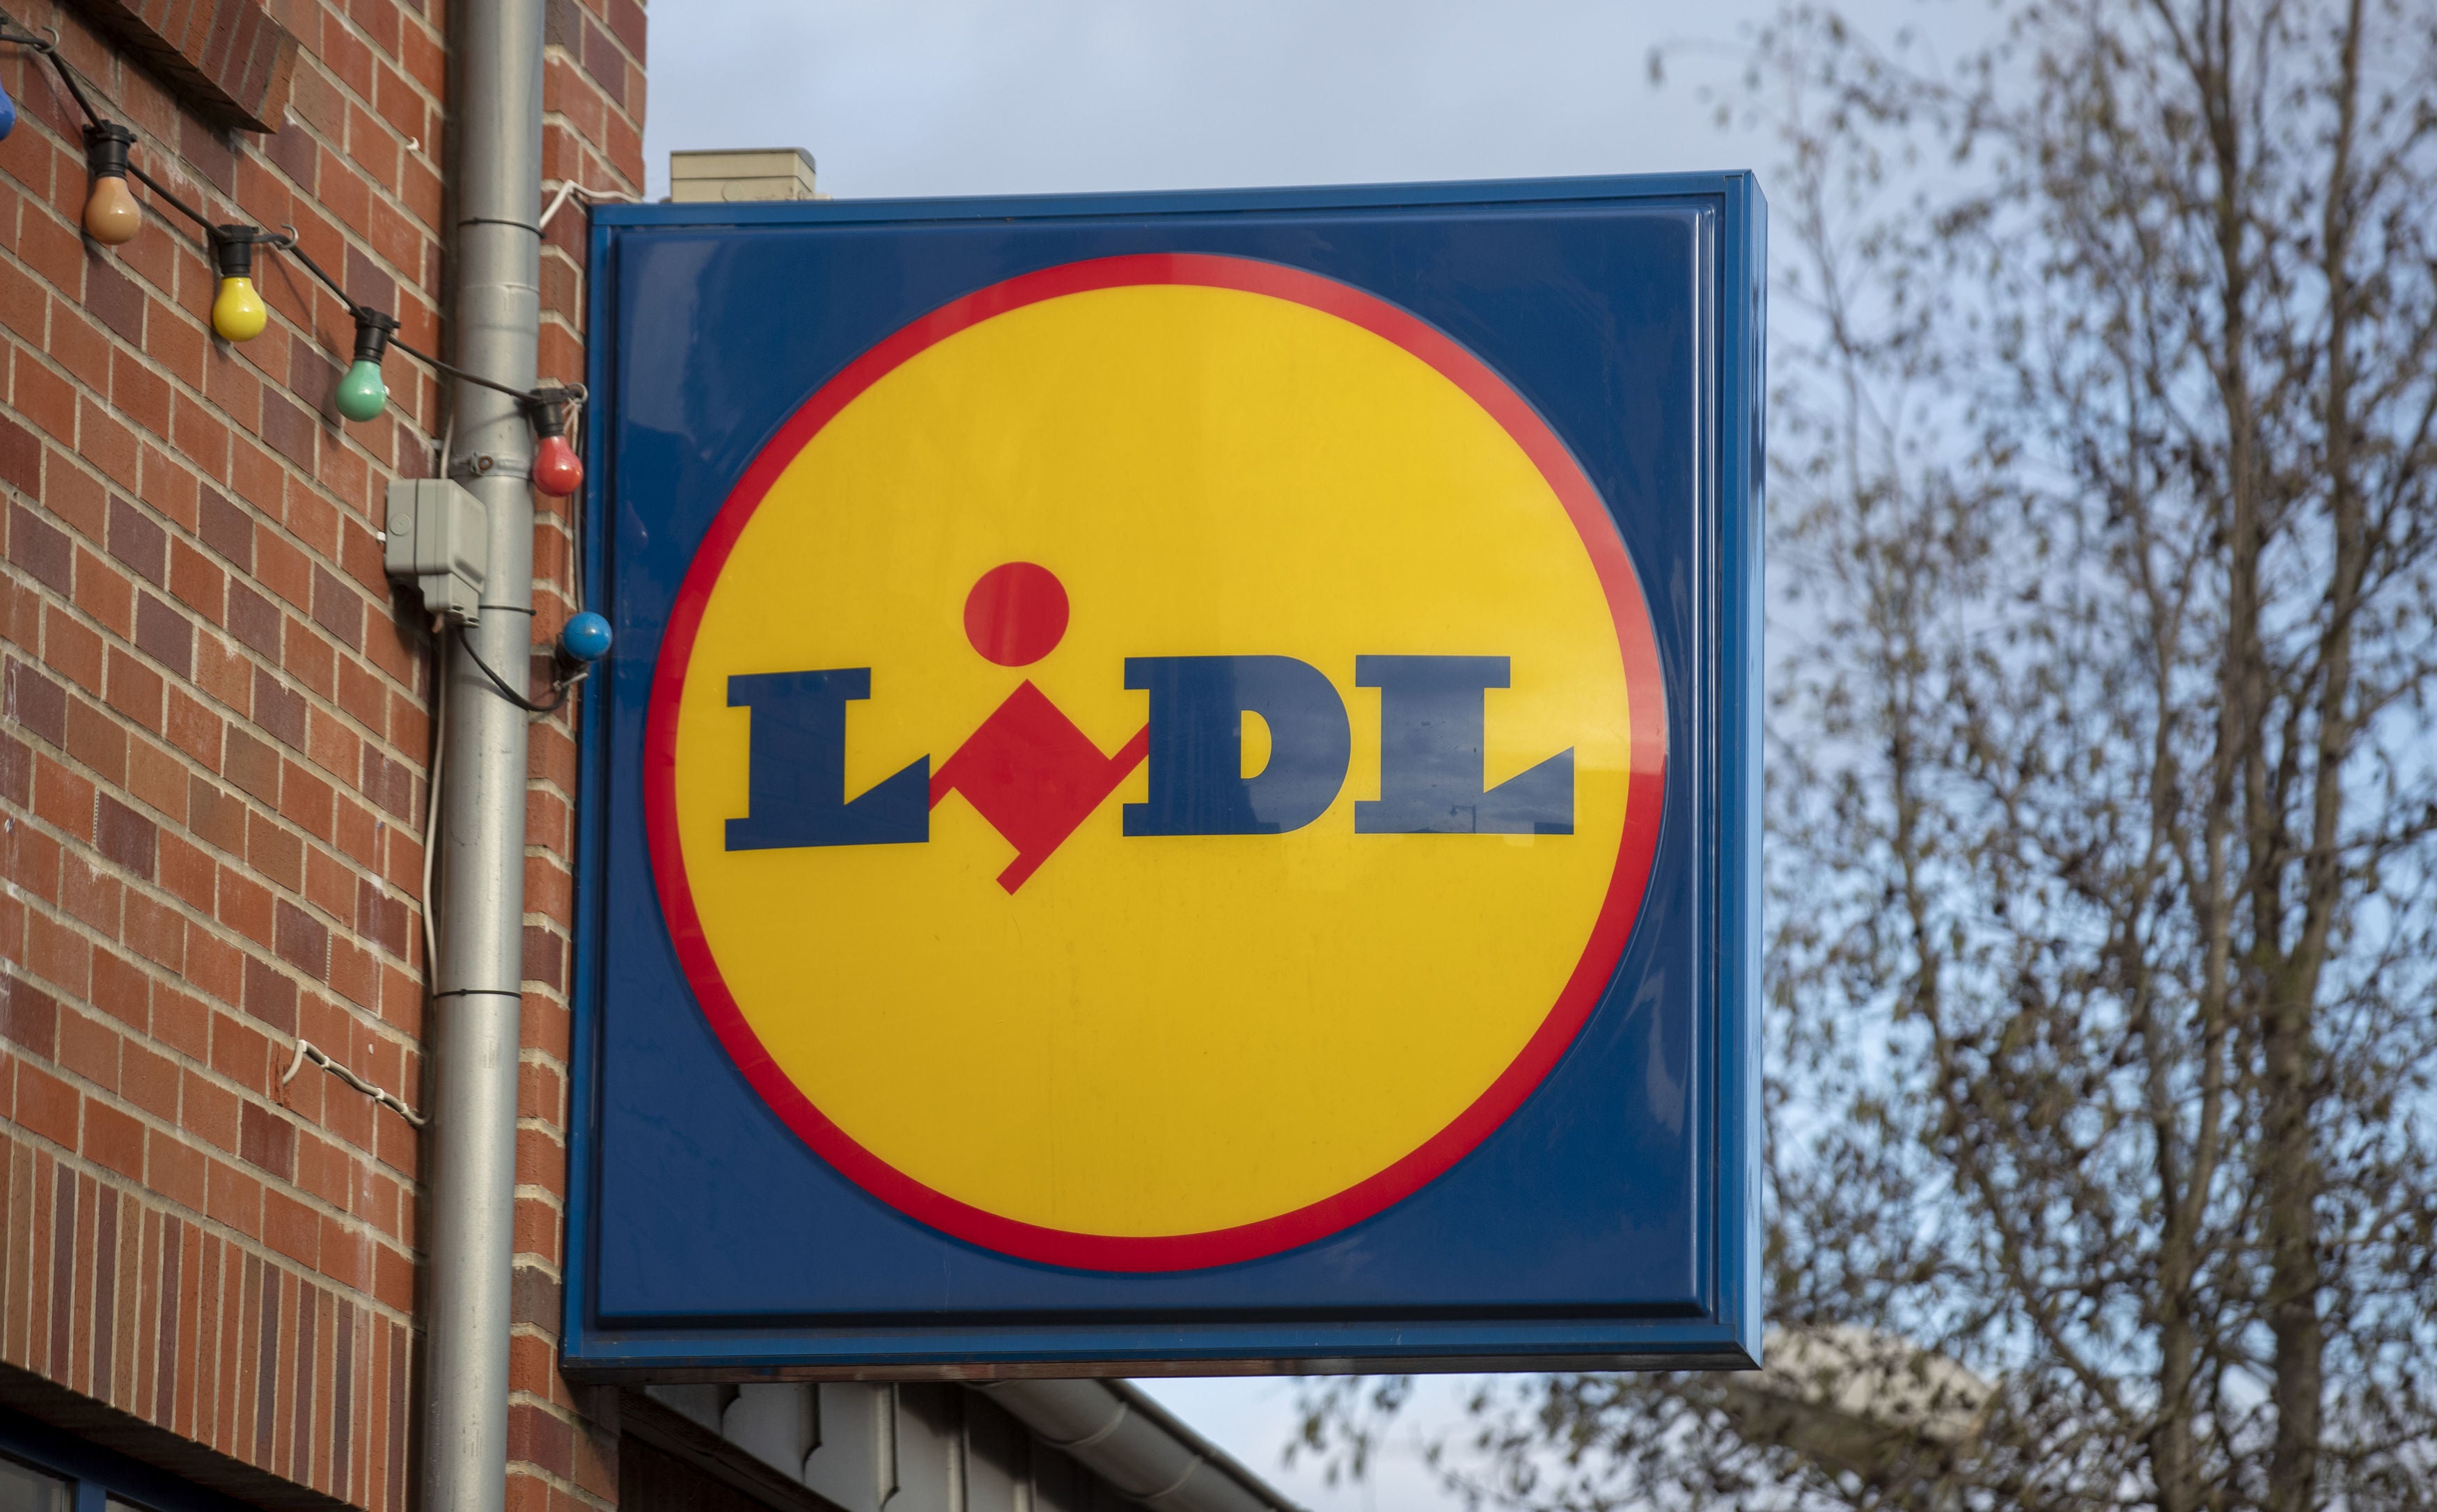 Lidl is the sector’s top player but isn’t an accredited living wage employer